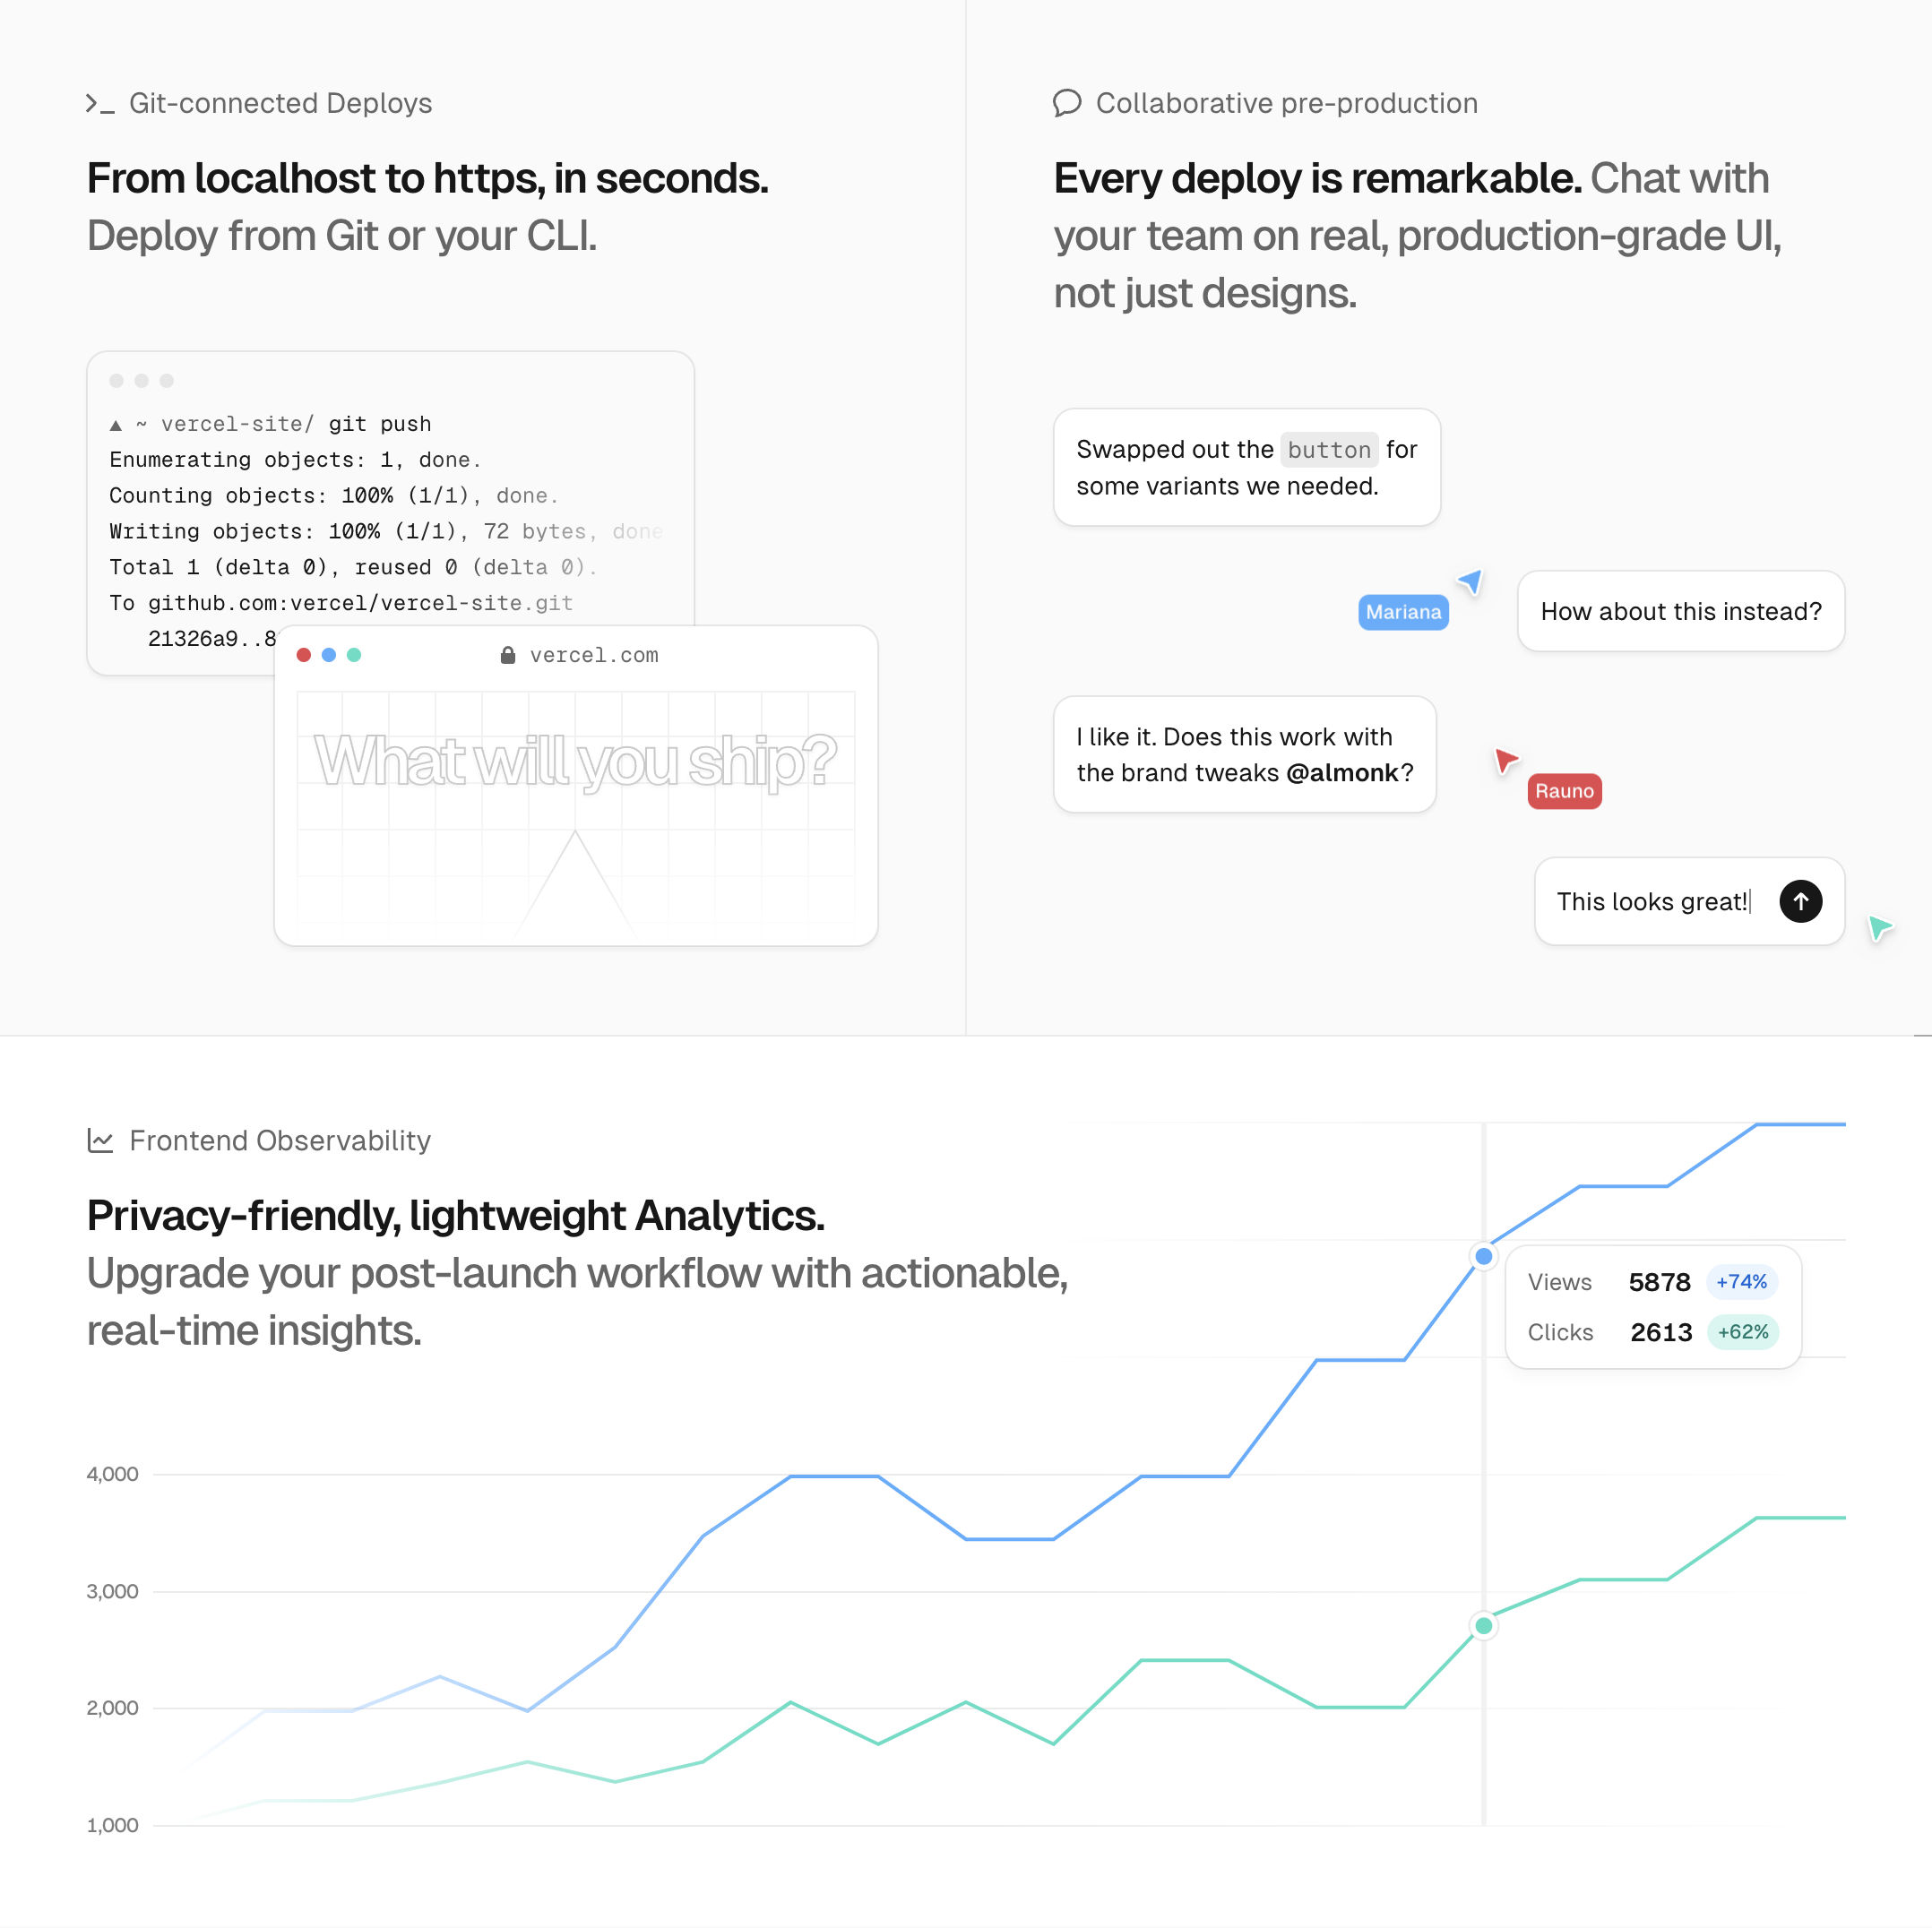 Two illustrations are side by side: one showing the Git push deployment workflow, and the other commenting on preview deployments. A third illustration is full width beneath the two. The illustration shows an analytics graph.